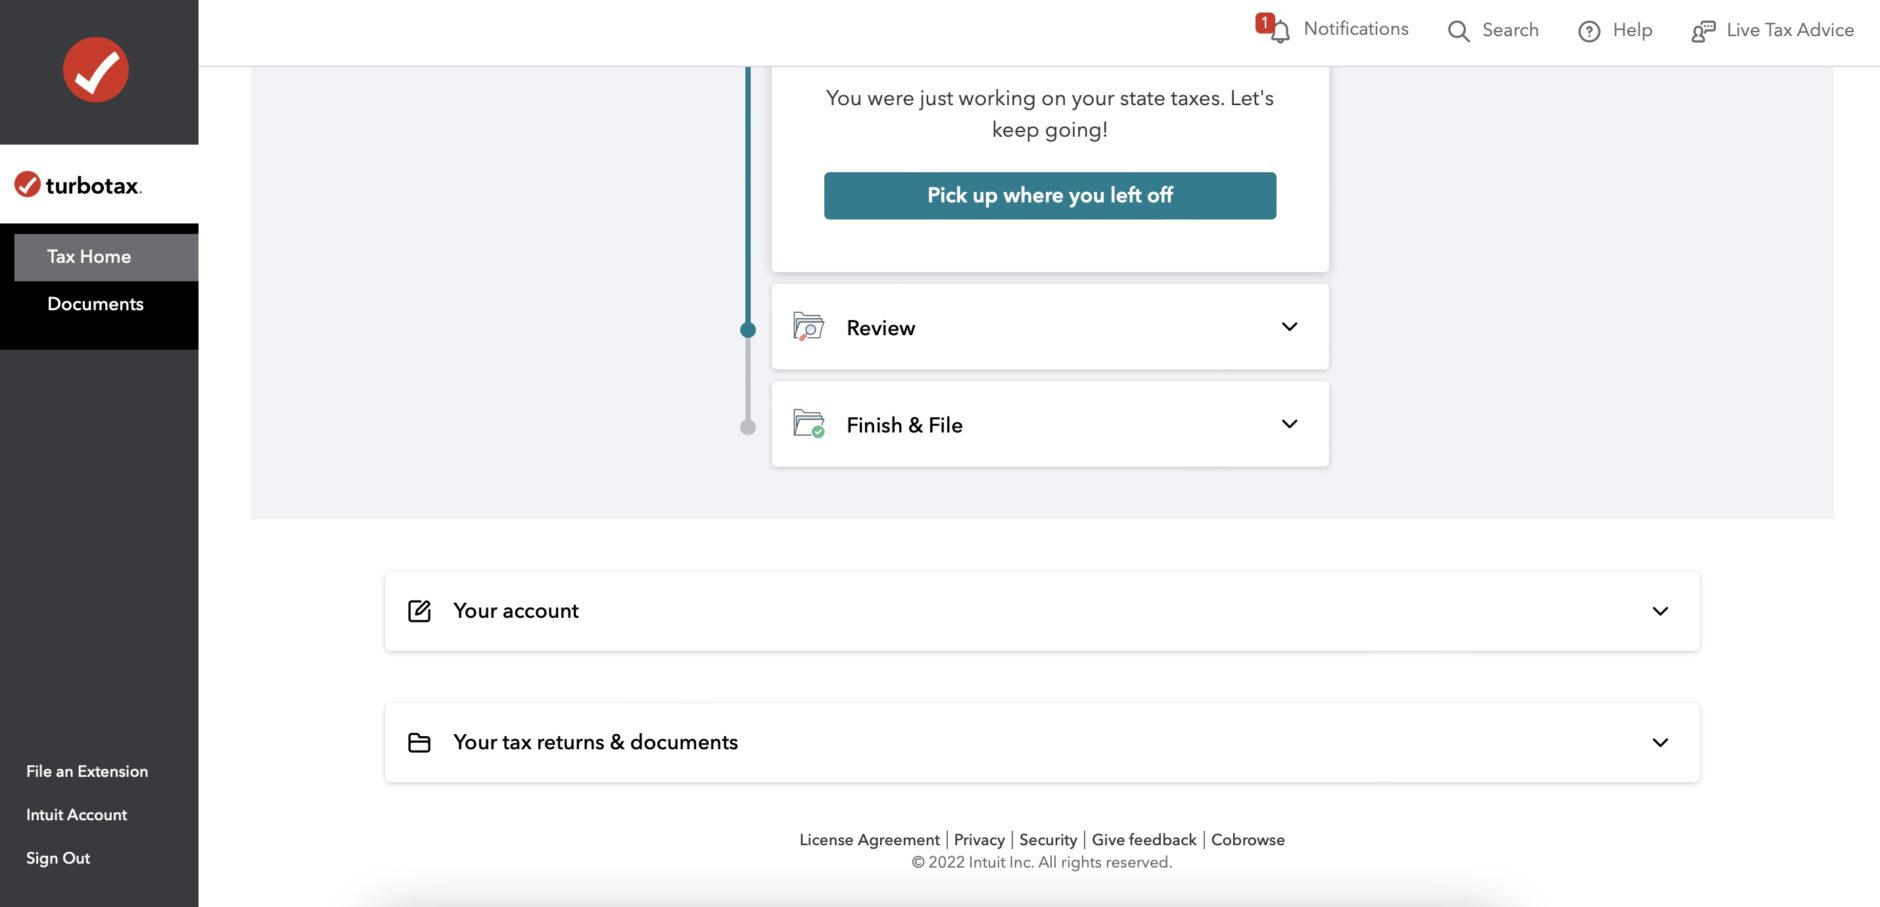 A screenshot of the TurboTax homepage. TurboTax features a limited footer, which includes security information that users may need throughout their time using the tool.